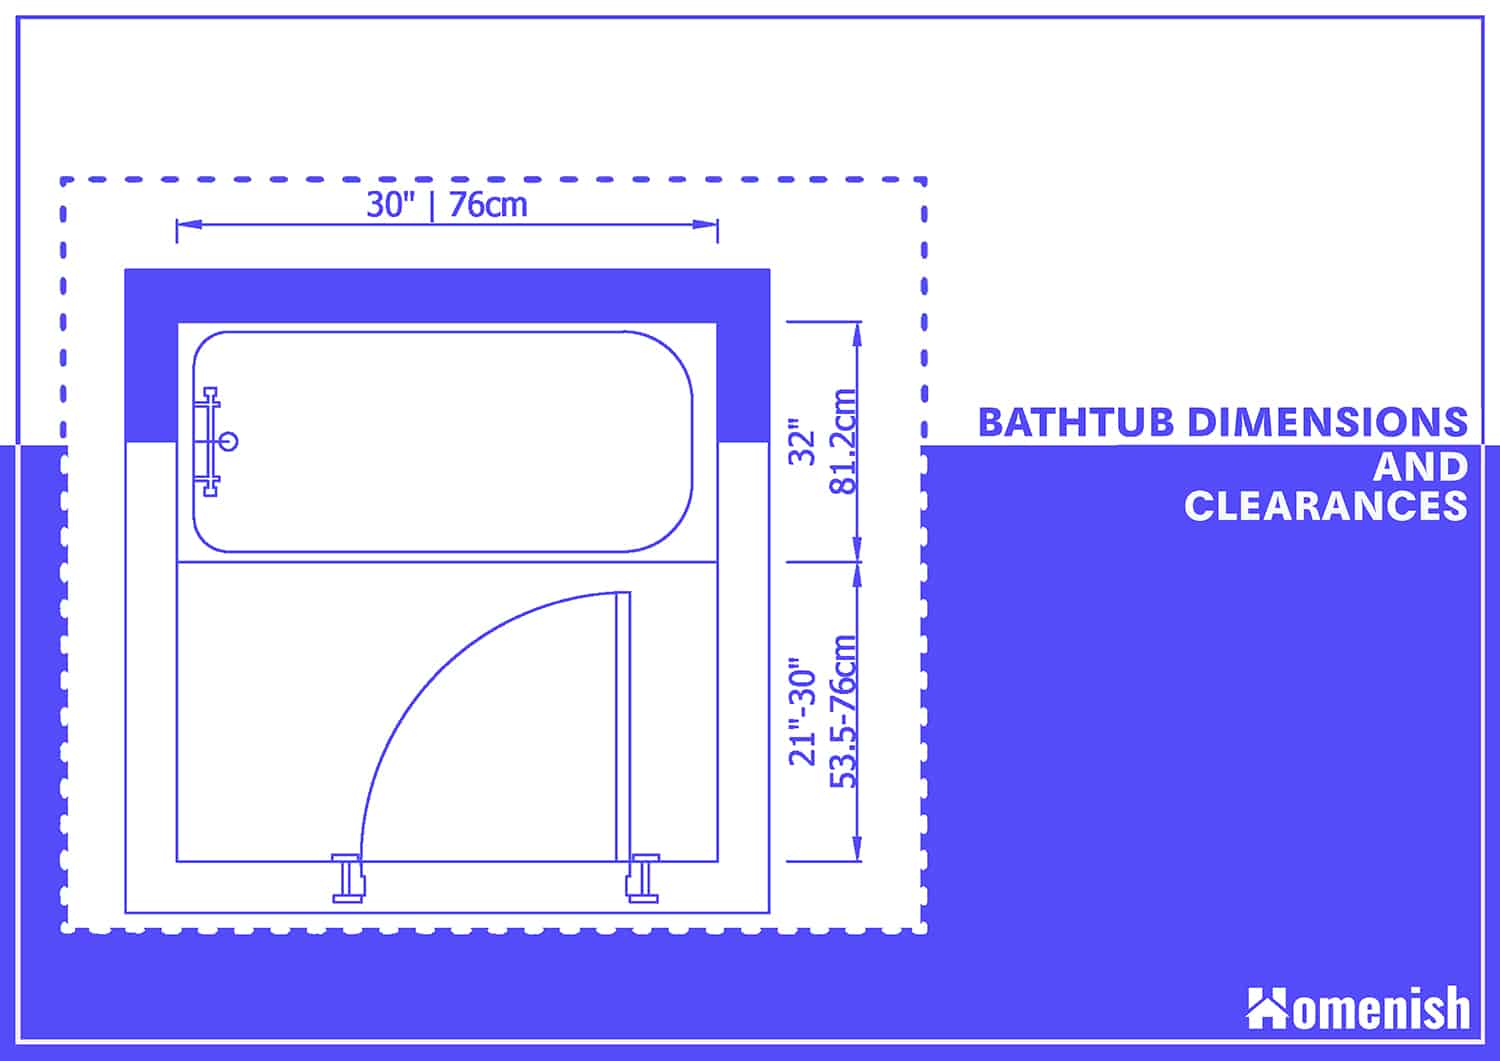 What Is The Average Size Of Bathroom Homenish - How Many Square Feet Is A Standard Bathroom